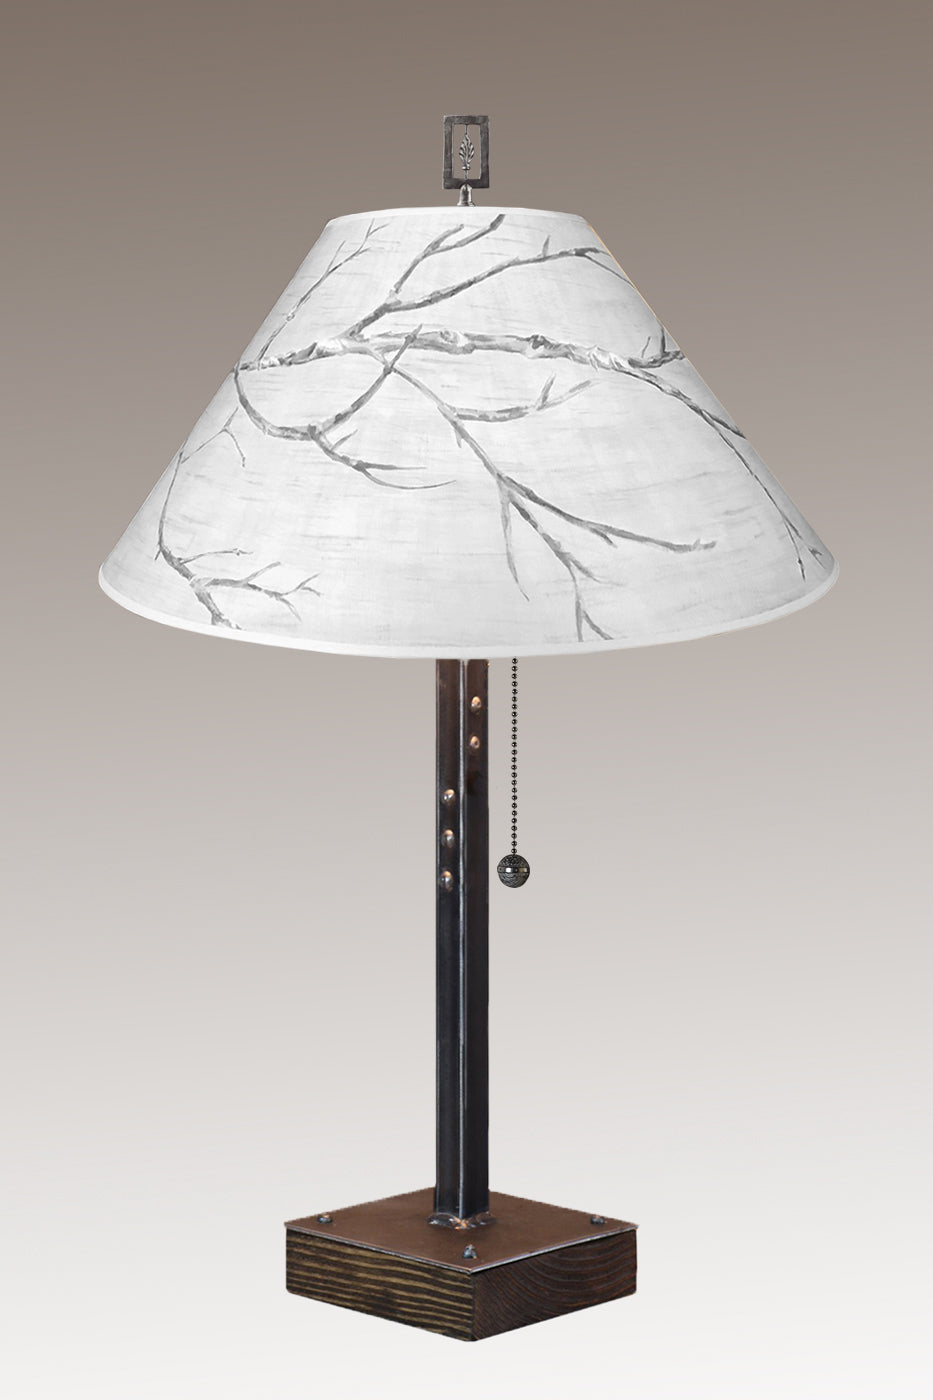 Janna Ugone &amp; Co Table Lamps Steel Table Lamp on Wood with Large Conical Shade in Sweeping Branch